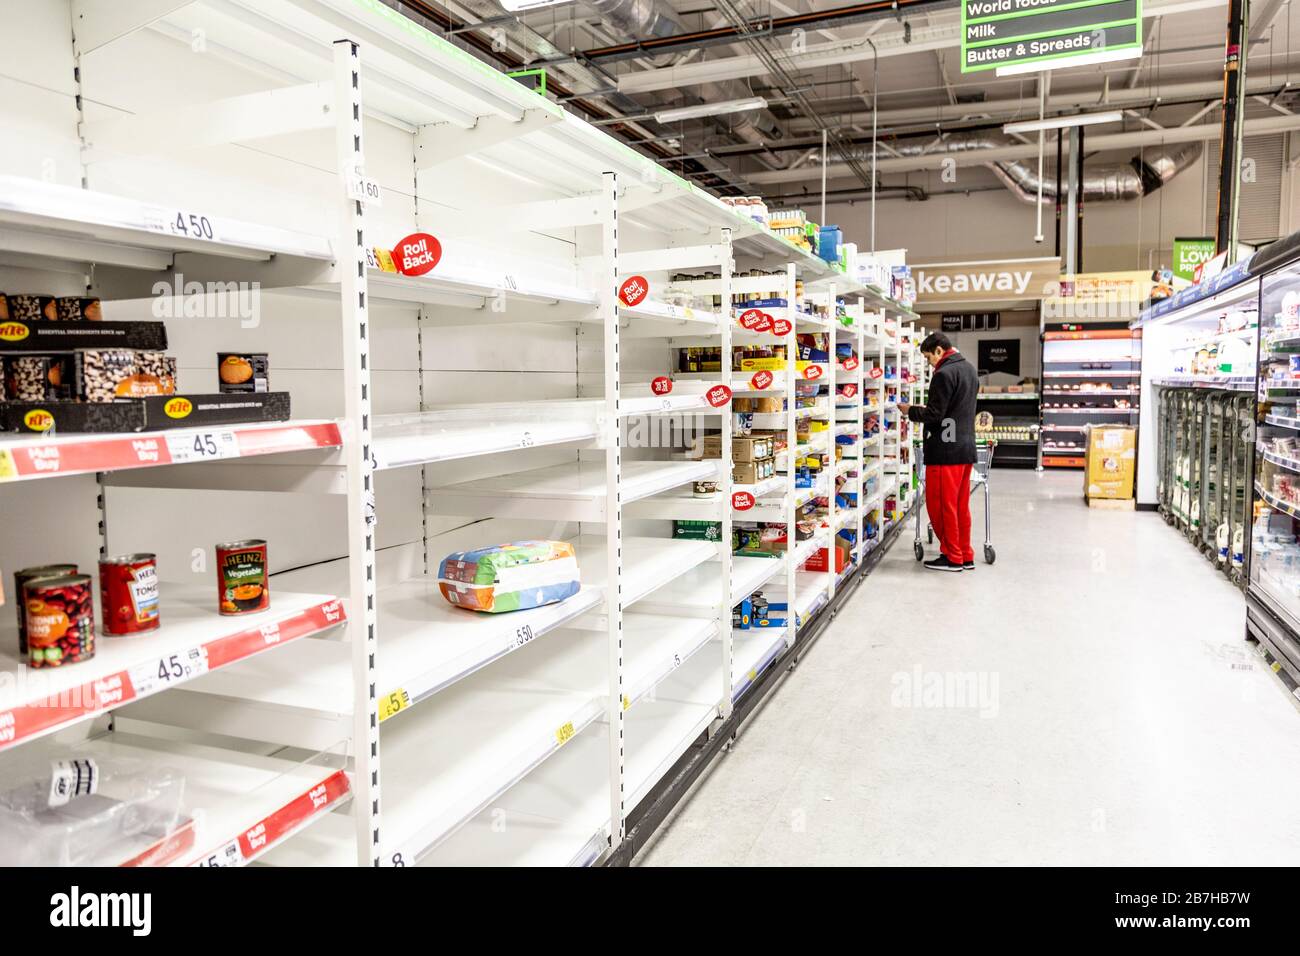 16 March 2020 - London, UK - Empty supermarket shelves at ASDA Stepney as people panic buy to stock up during the Coronavirus outbreak, empty long shelf life isle, out-of-stock canned and jarred products, grains, pasta and rice Stock Photo